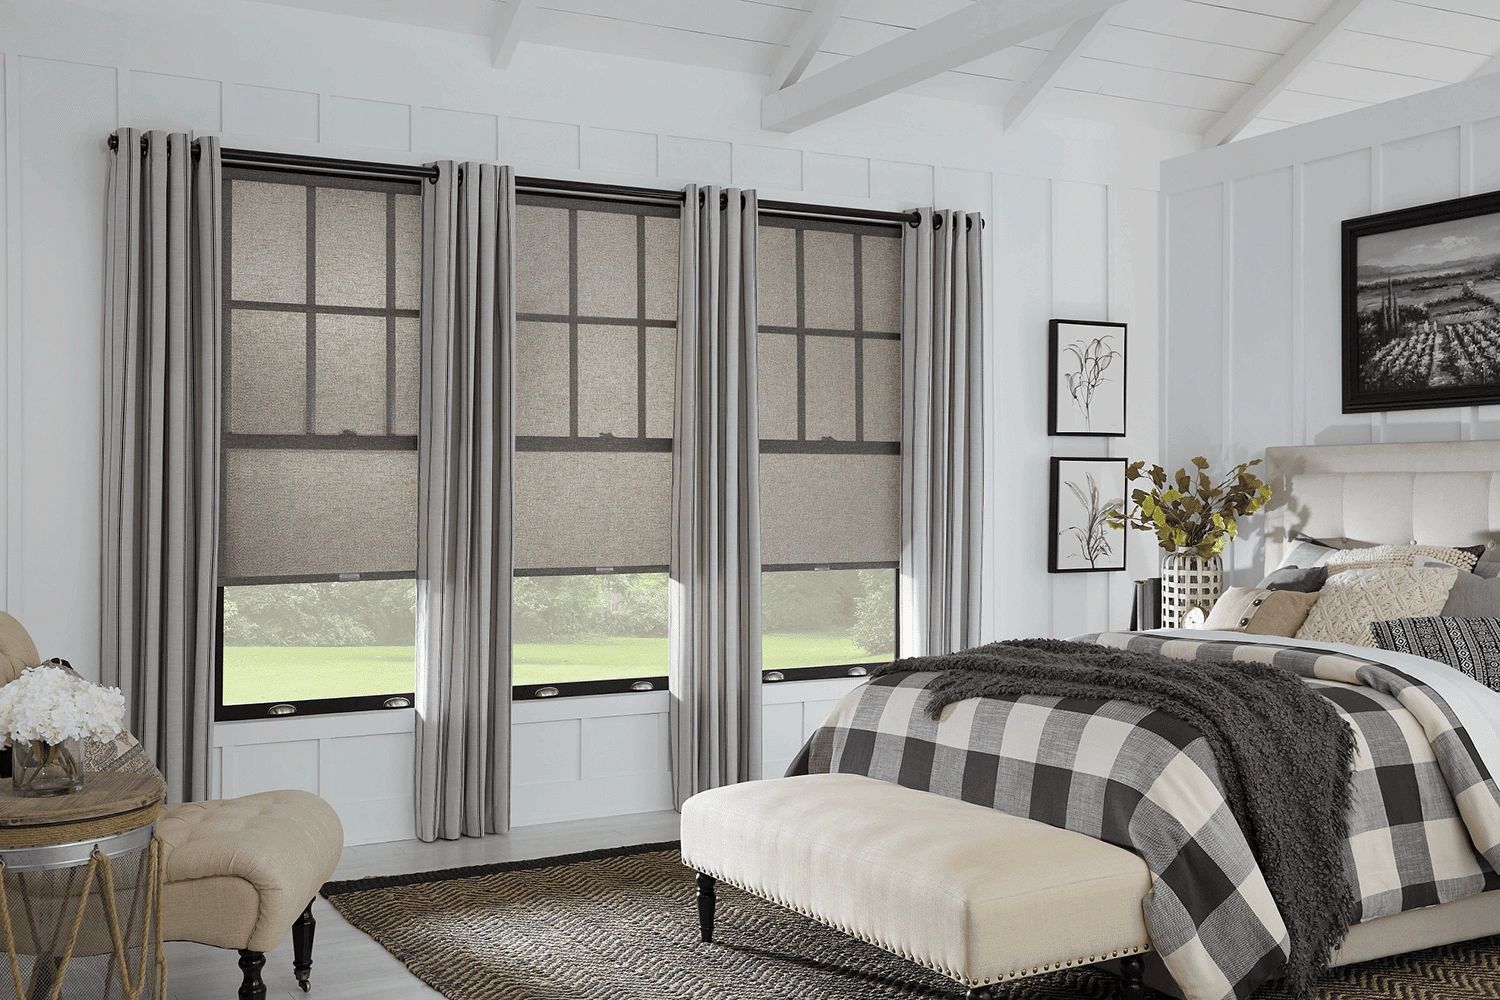 Shades with curtains in bedroom